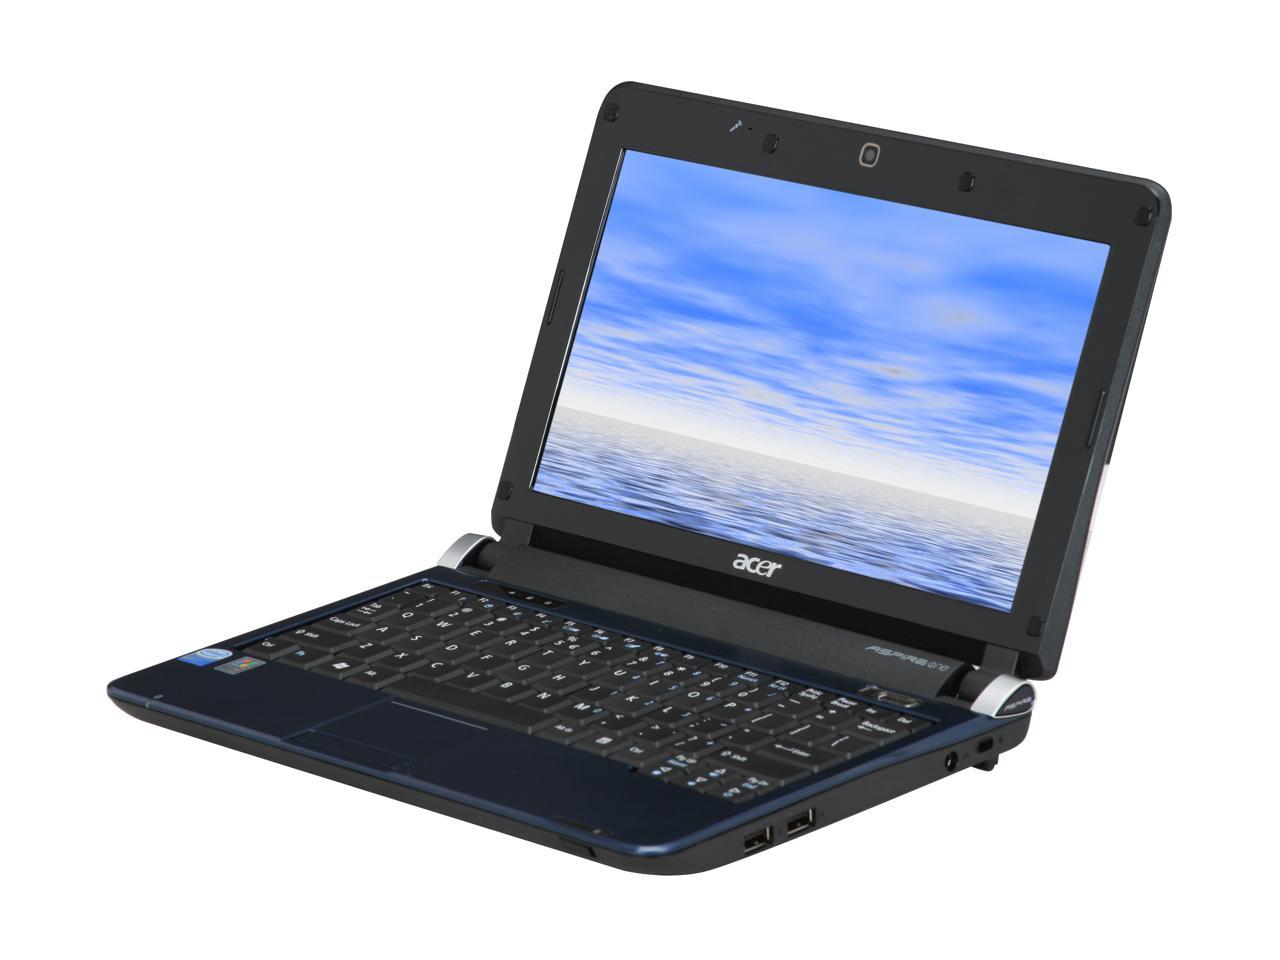 Acer Aspire one d150. Acer Aspire one kav10. Acer Aspire one 150. Acer one d150 n270. Aspire happy